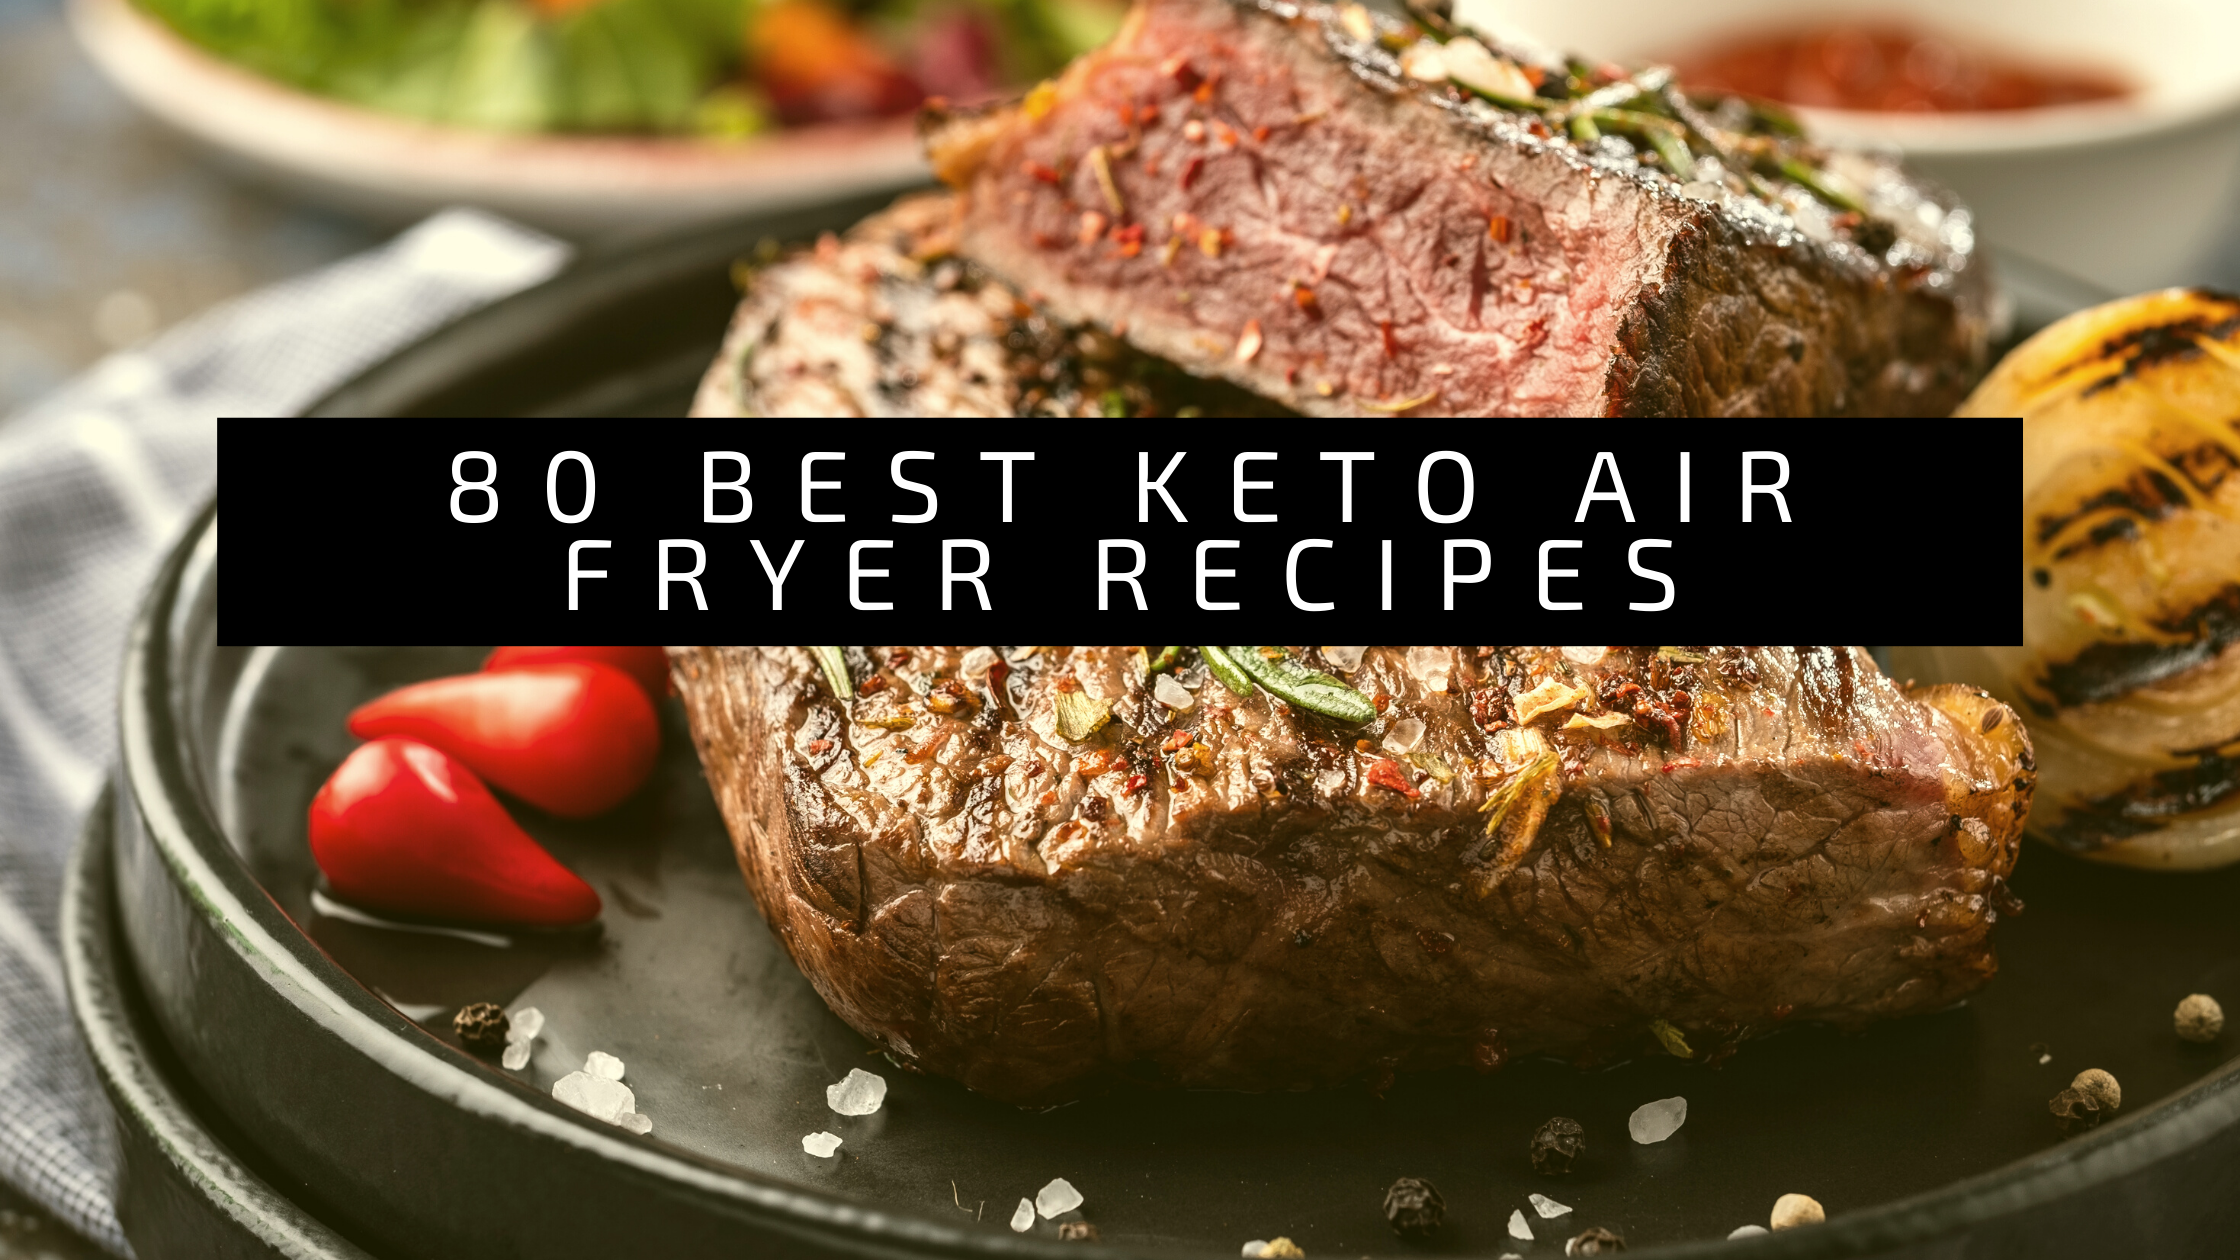 40 Family-Friendly Keto Air Fryer Recipes for Quick and Delicious Meals 76